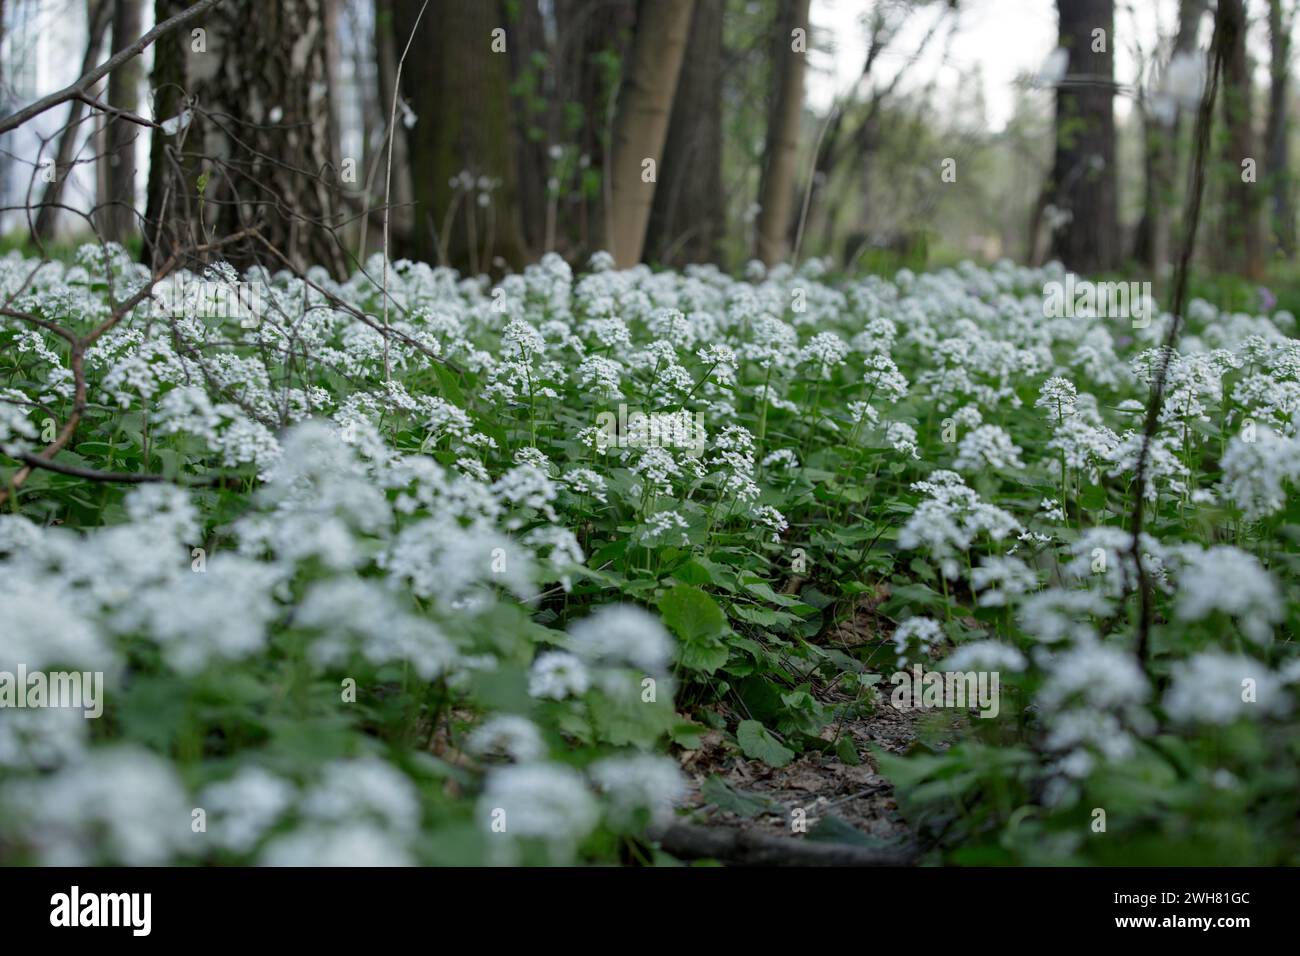 Arabis alpina, mountain rockcress or alpine rock cress. Arabis caucasica. White arabis caucasica flowers growing in the forest. Floral background. sel Stock Photo